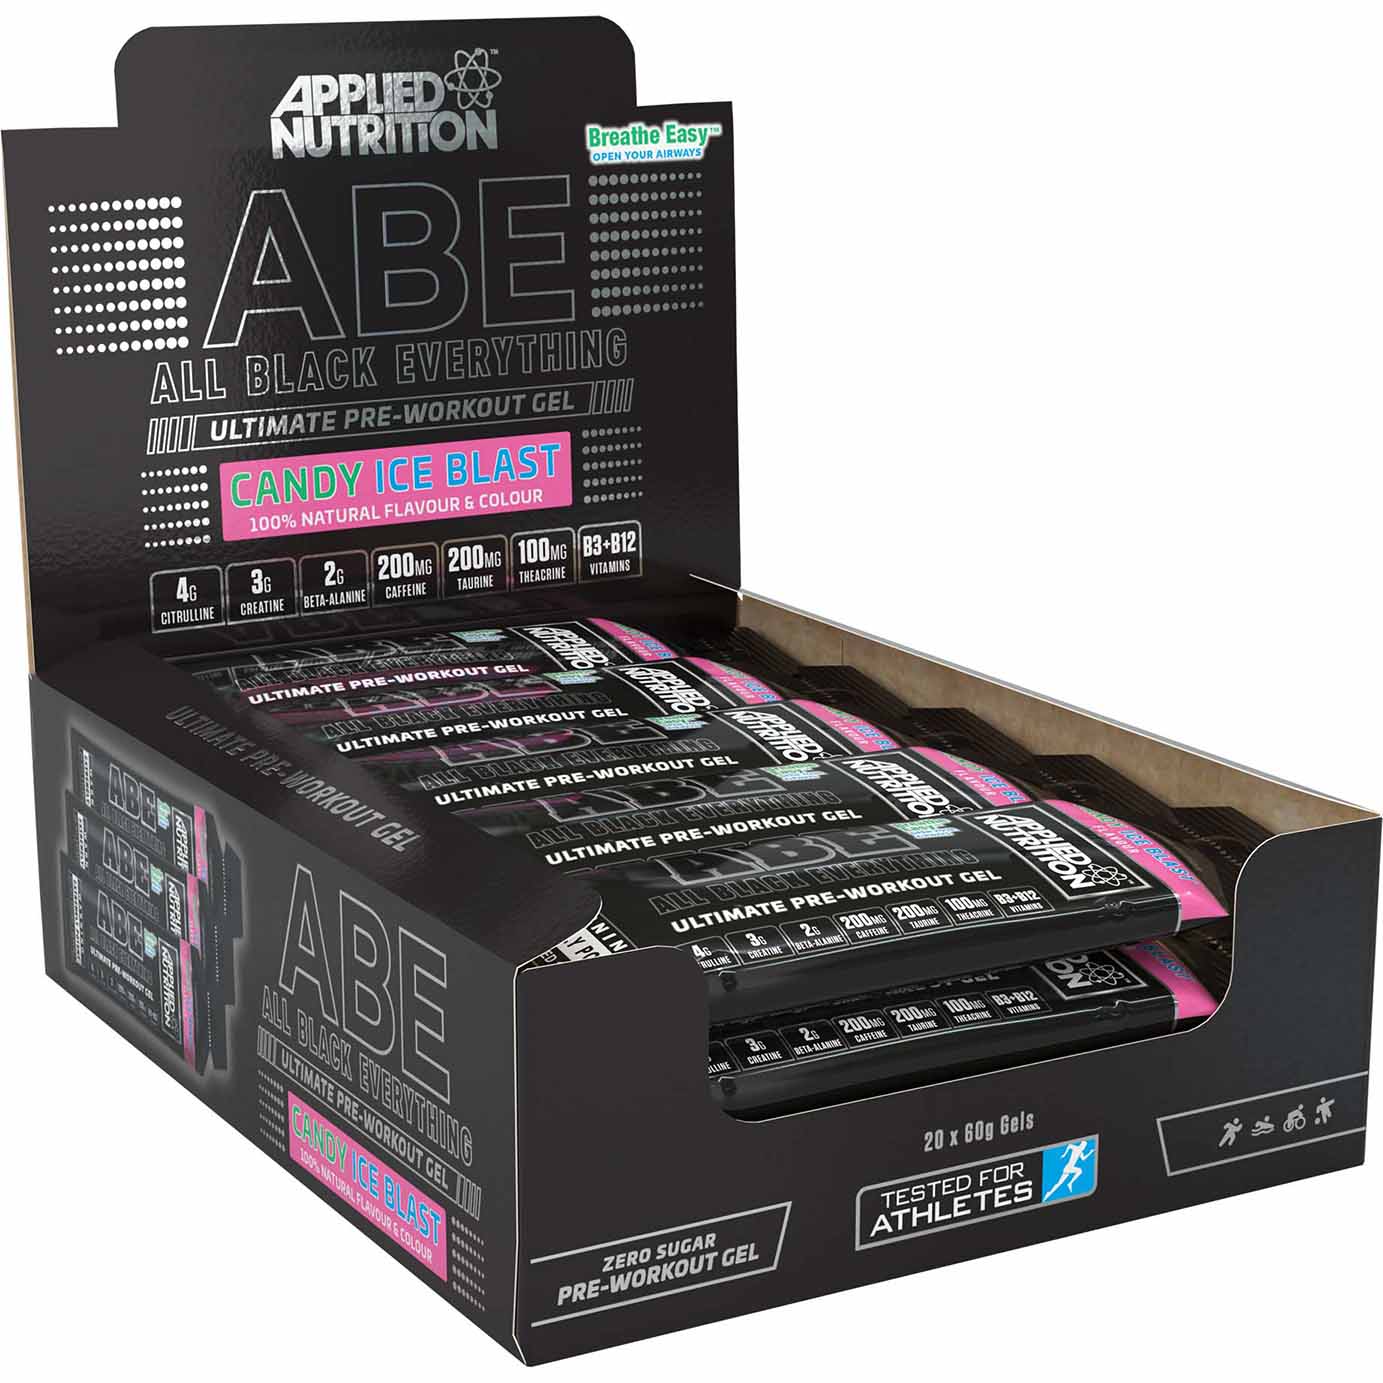 Applied Nutrition ABE Ultimate Pre Workout Gel Box of 20 Pieces Candy Ice Blast